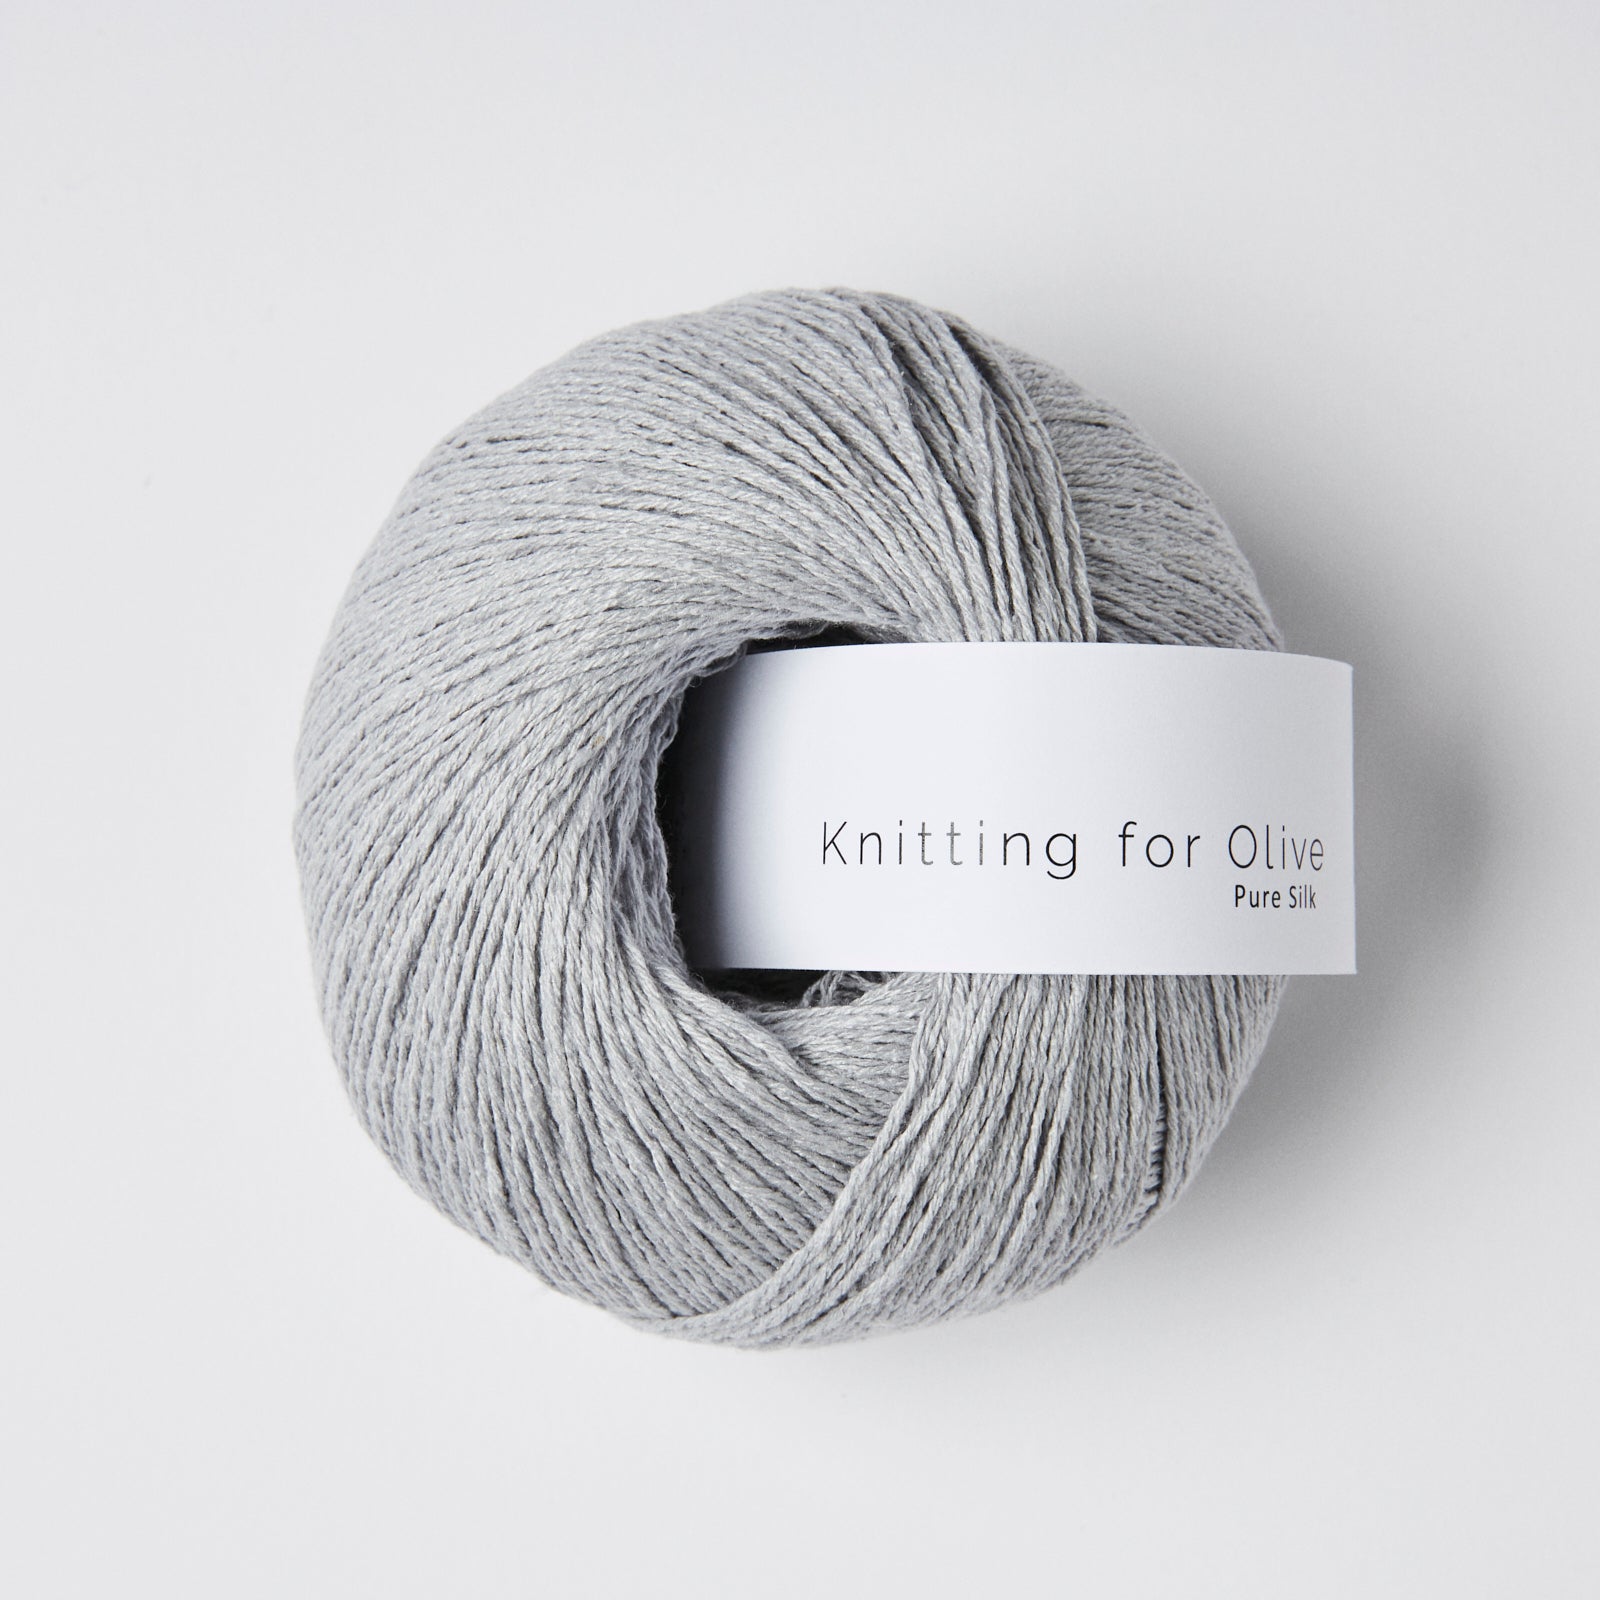 Knitting for Olive Pure Silk - Soft Blue